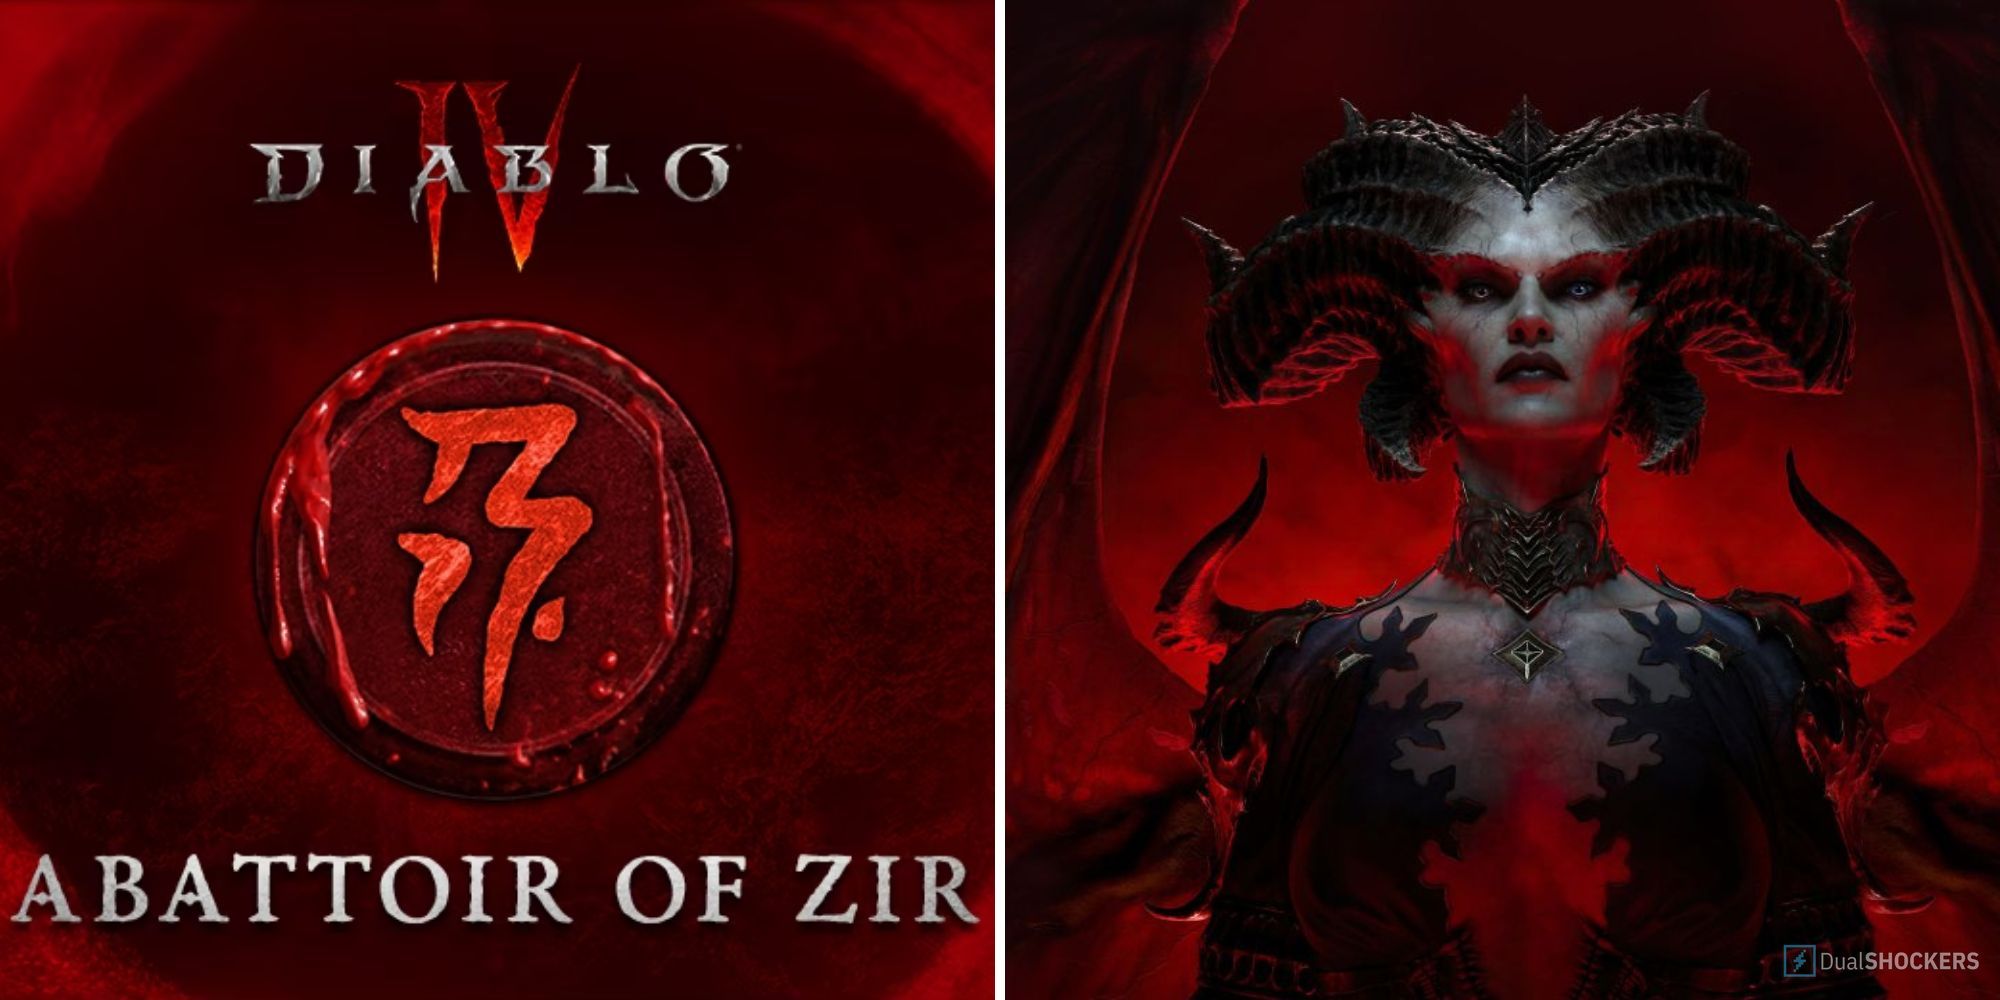 the promotional image for the abattoir of zir event image next to a picture of lilith